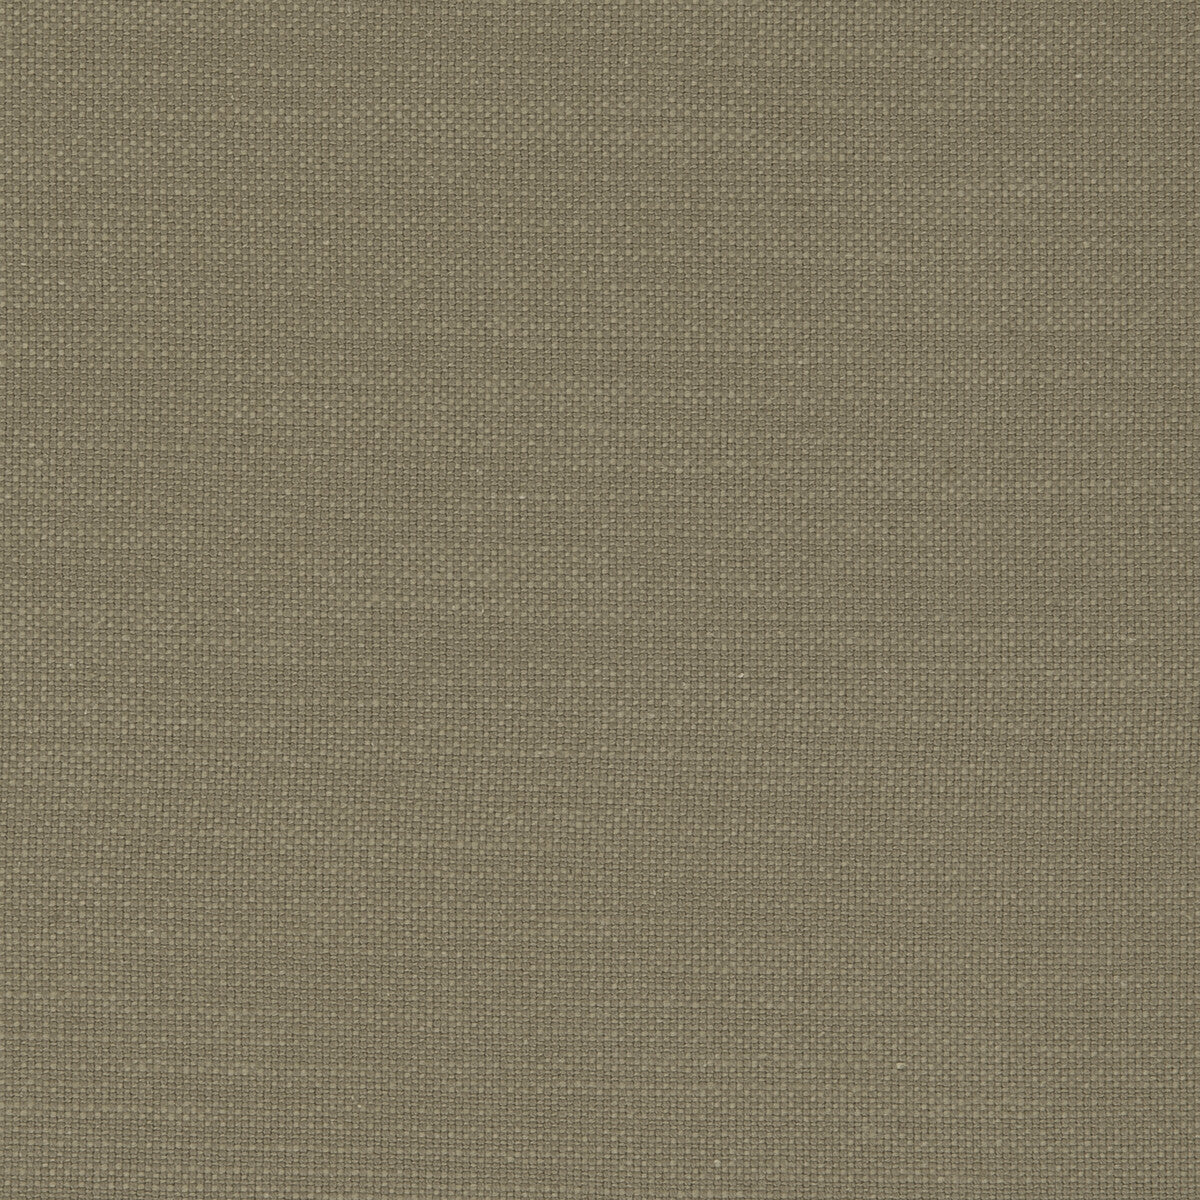 Nantucket fabric in flax color - pattern F0594/20.CAC.0 - by Clarke And Clarke in the Clarke &amp; Clarke Nantucket collection